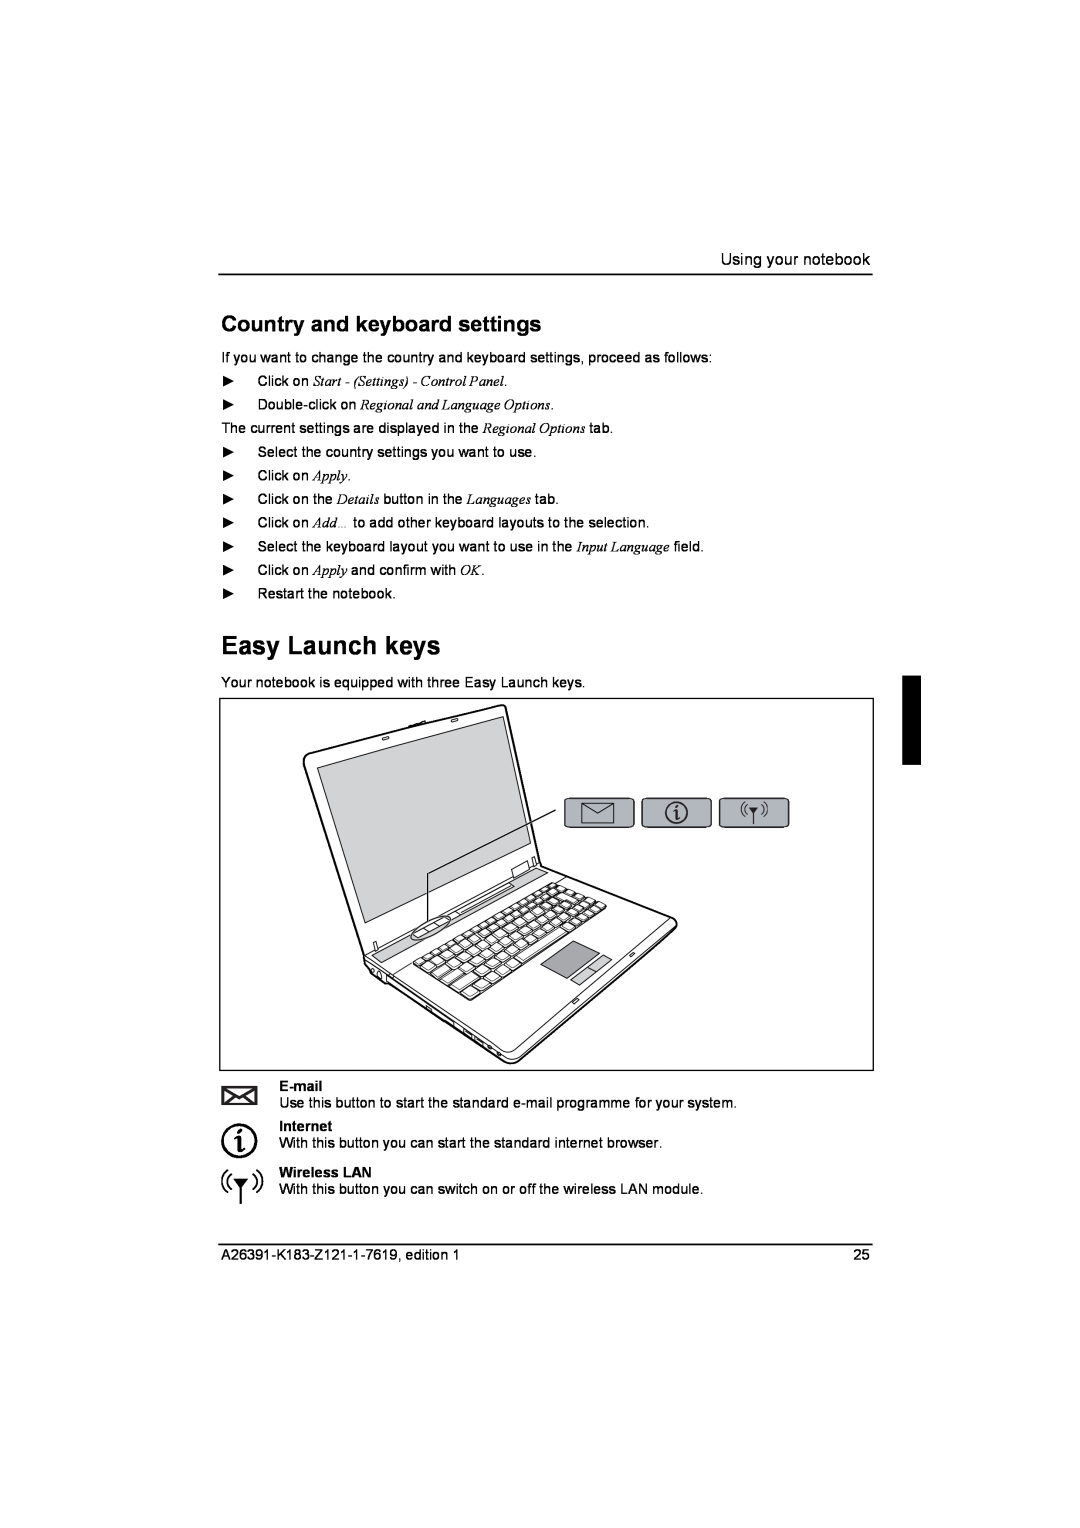 Fujitsu Siemens Computers V2035 Easy Launch keys, Country and keyboard settings, Click on Start - Settings - Control Panel 